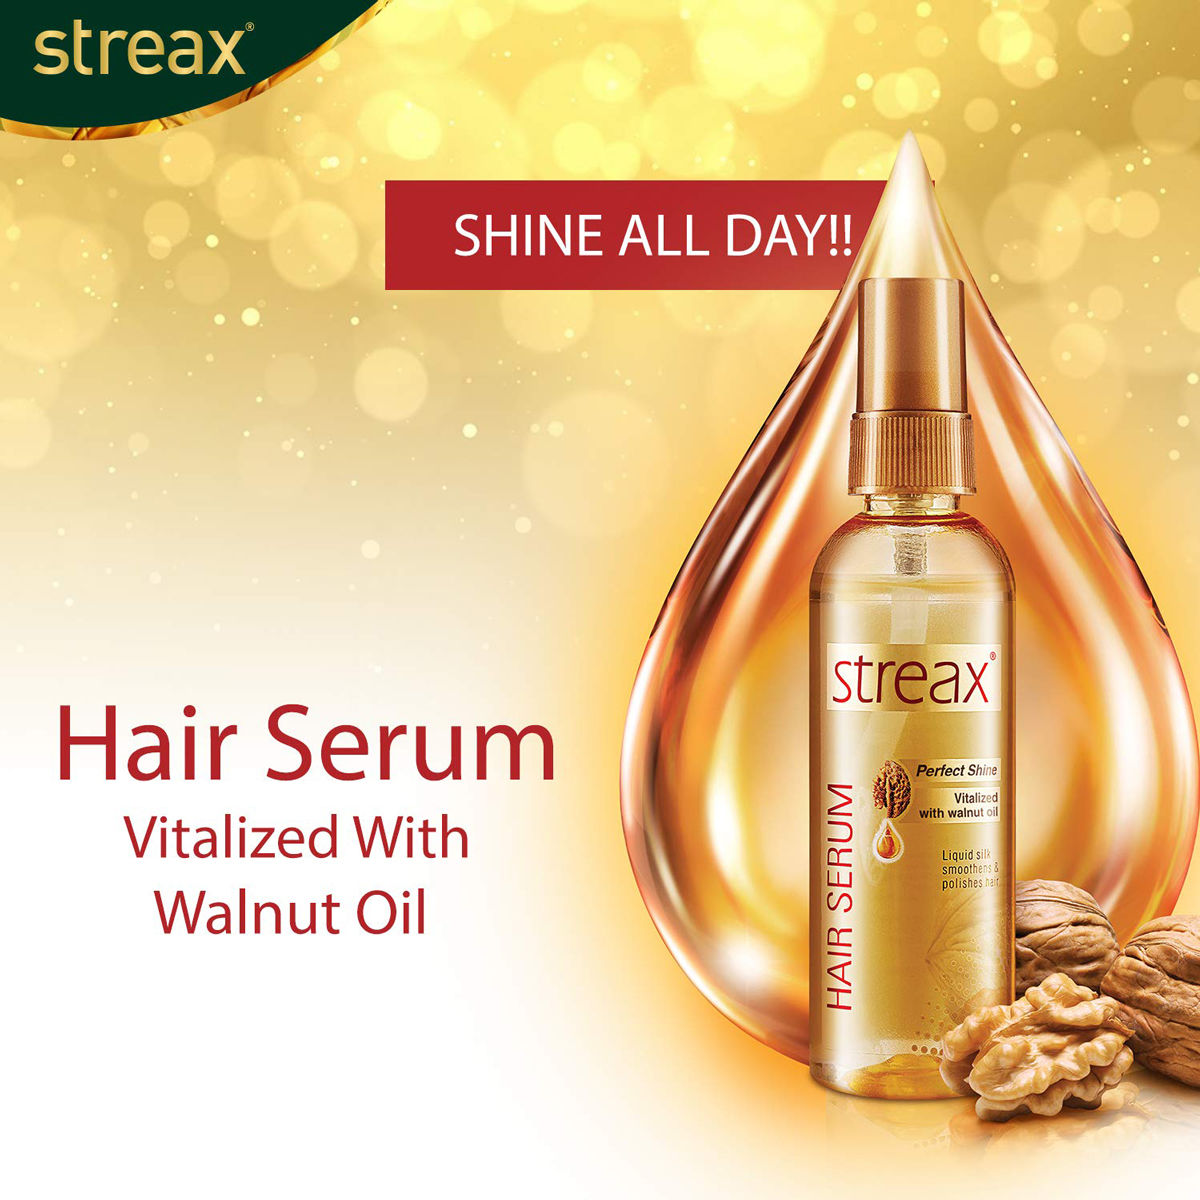 Streax Hair Serum, 100 ml Price, Uses, Side Effects, Composition - Apollo  Pharmacy